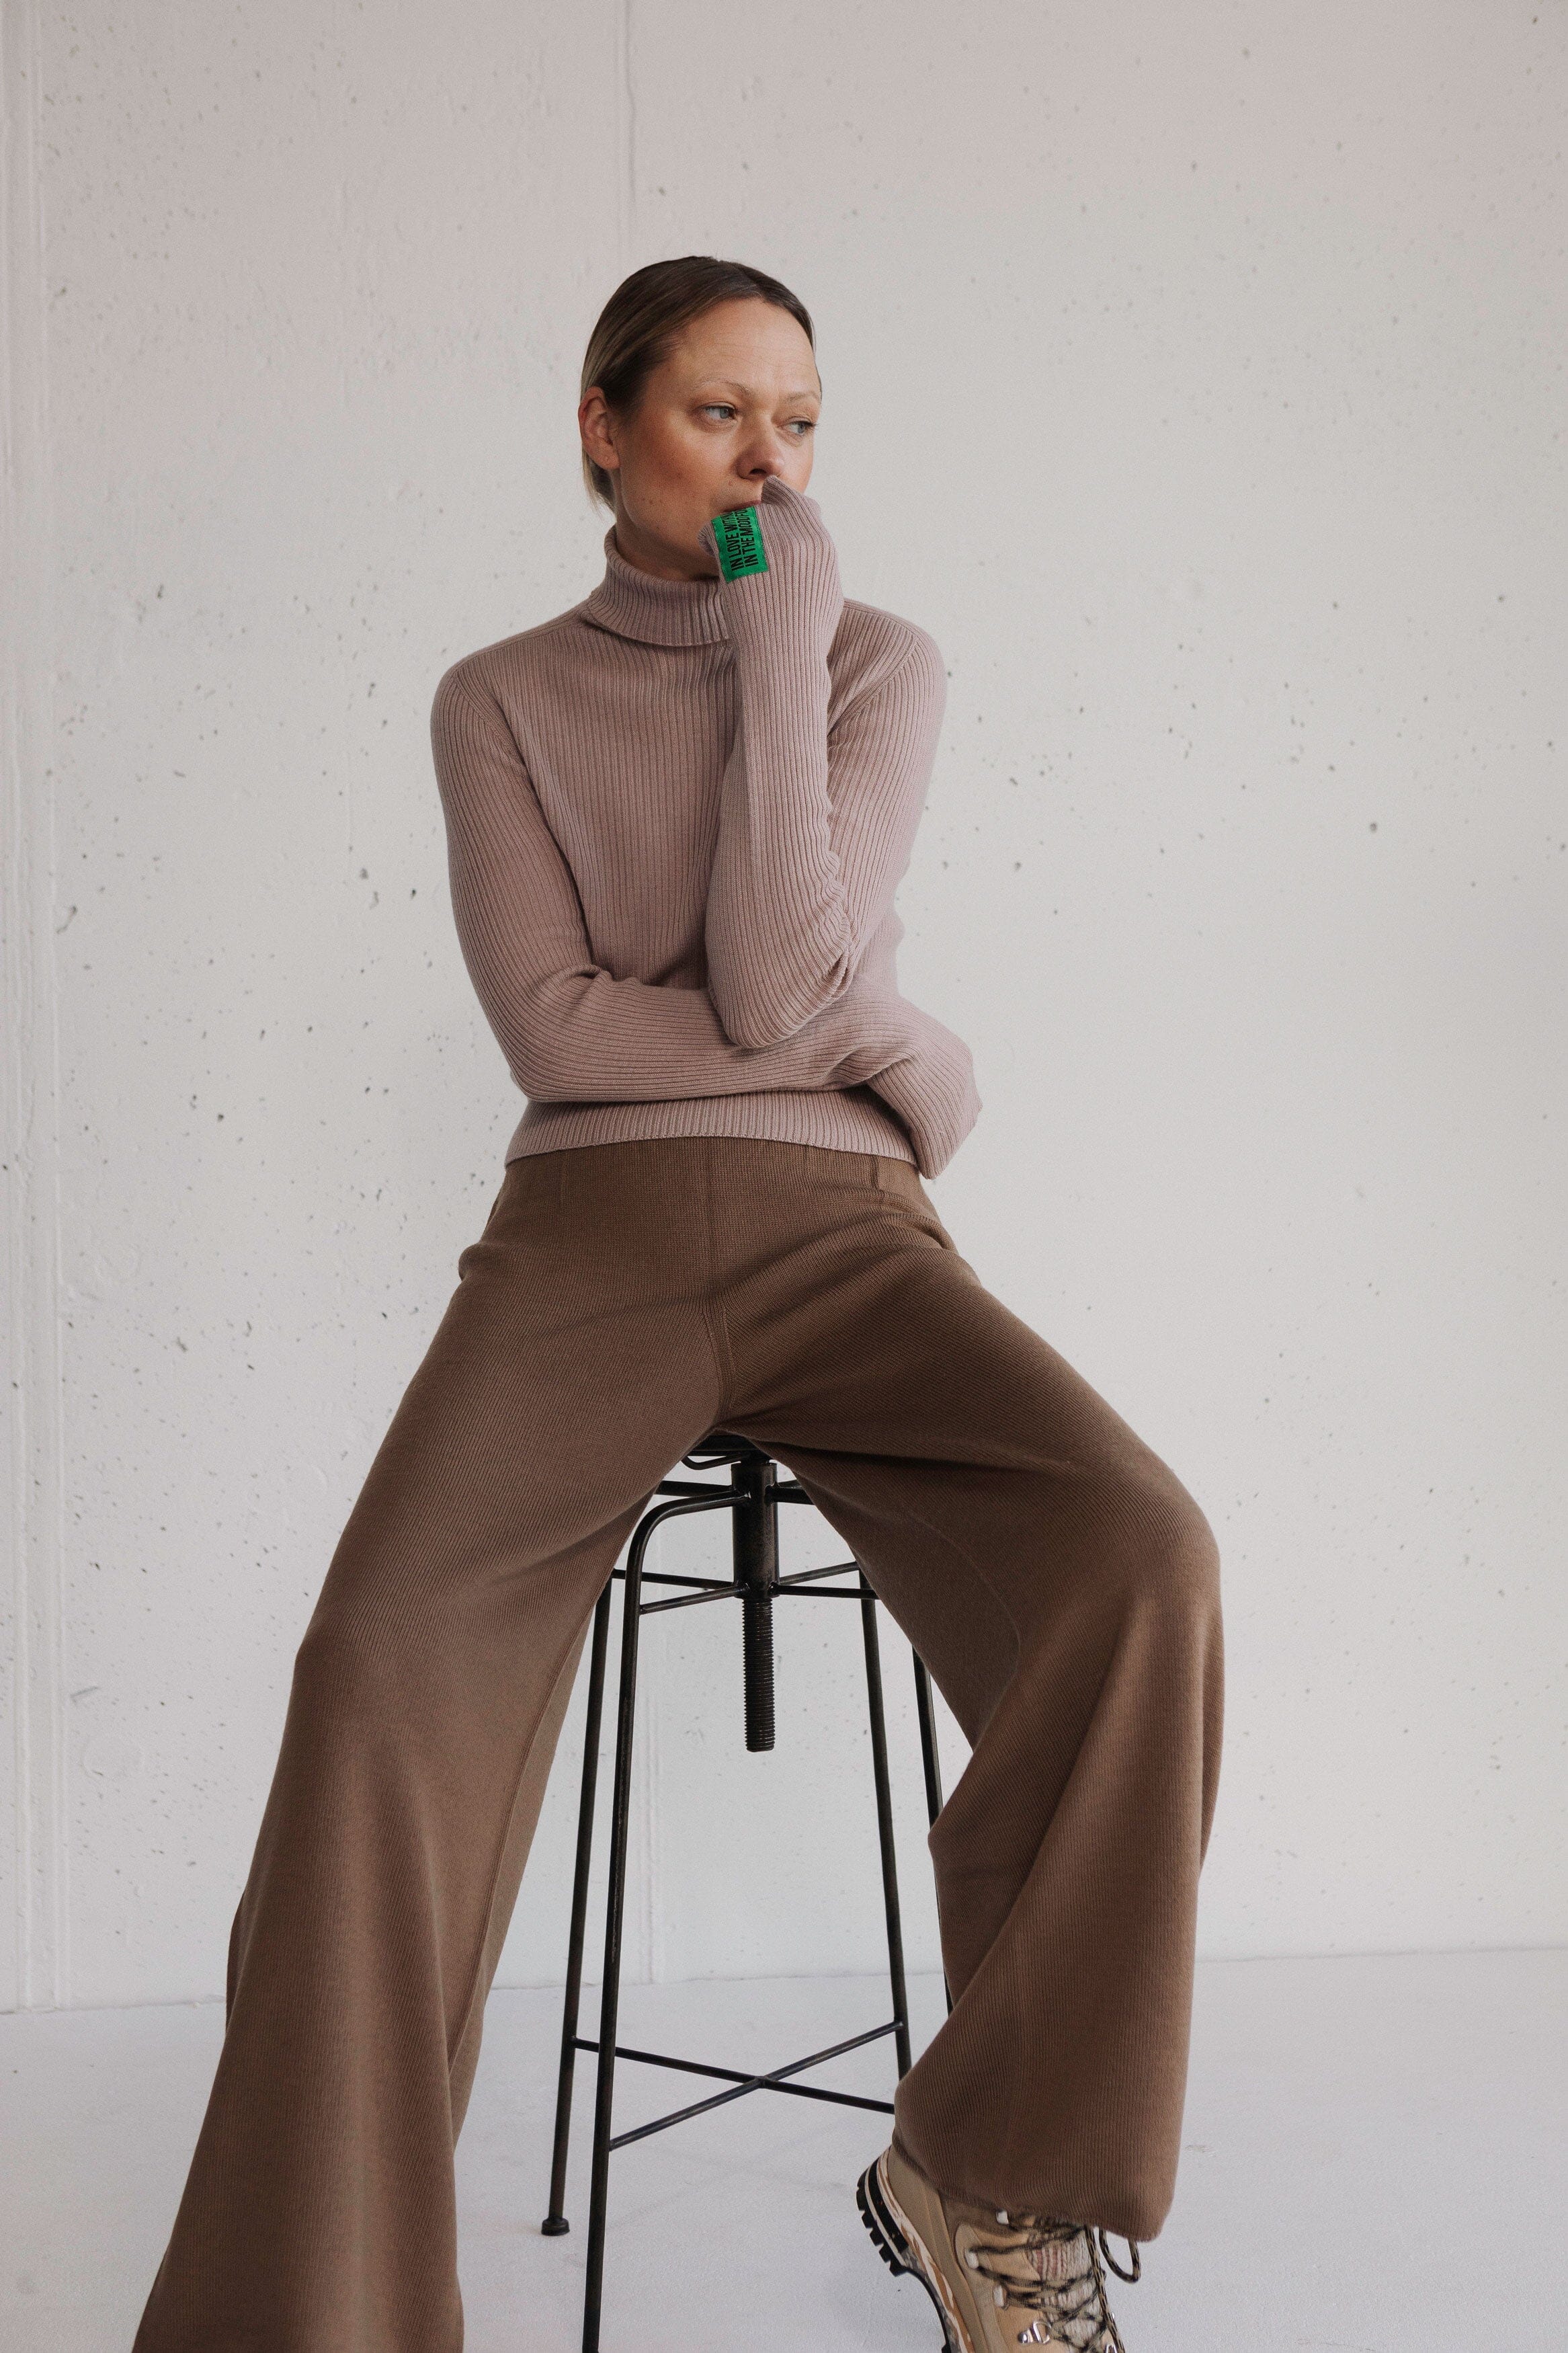 POWDER EXTRA FINE MERINO WOOL TURTLENECK NO. 2 for lovers and trees S/M 